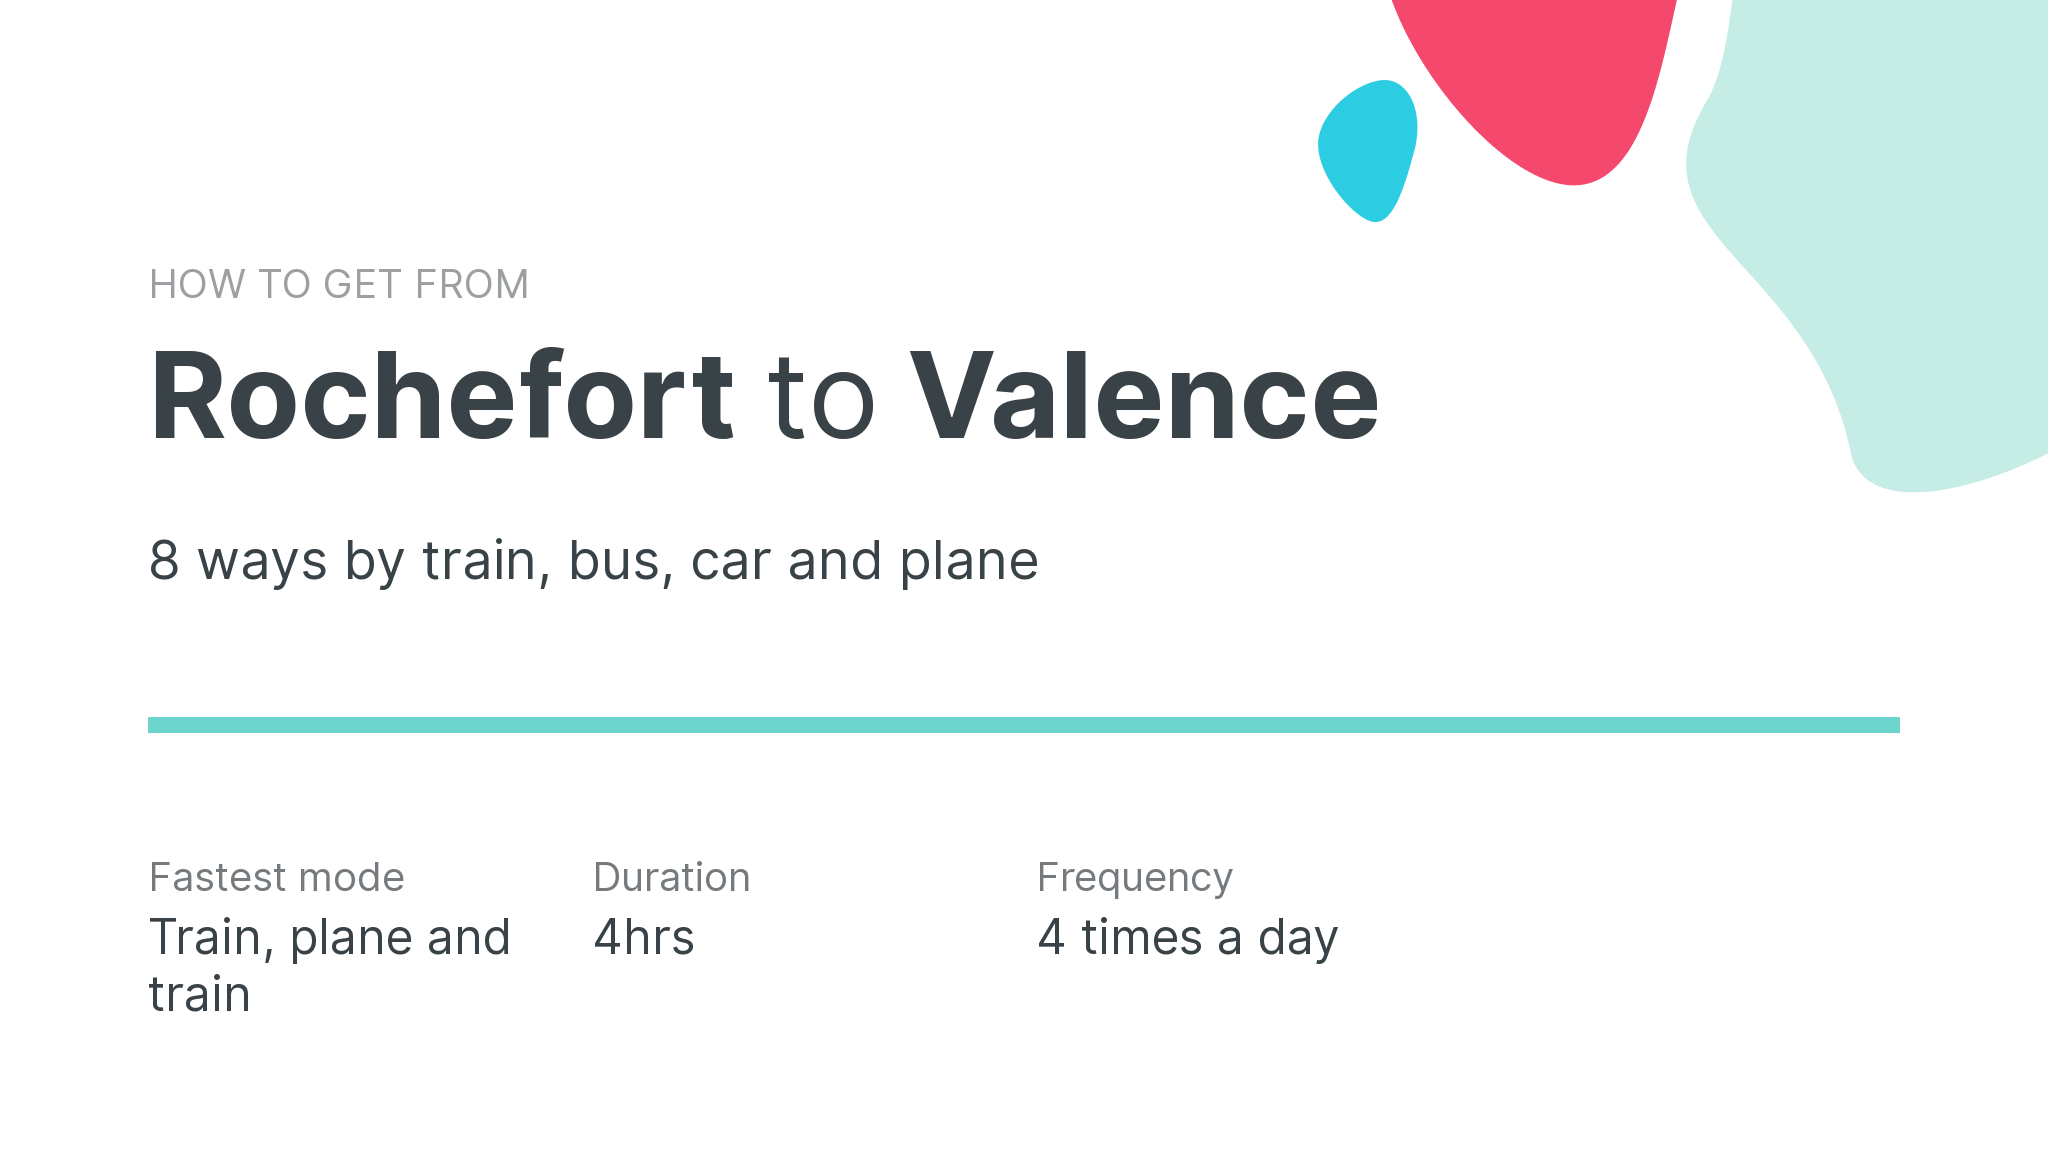 How do I get from Rochefort to Valence